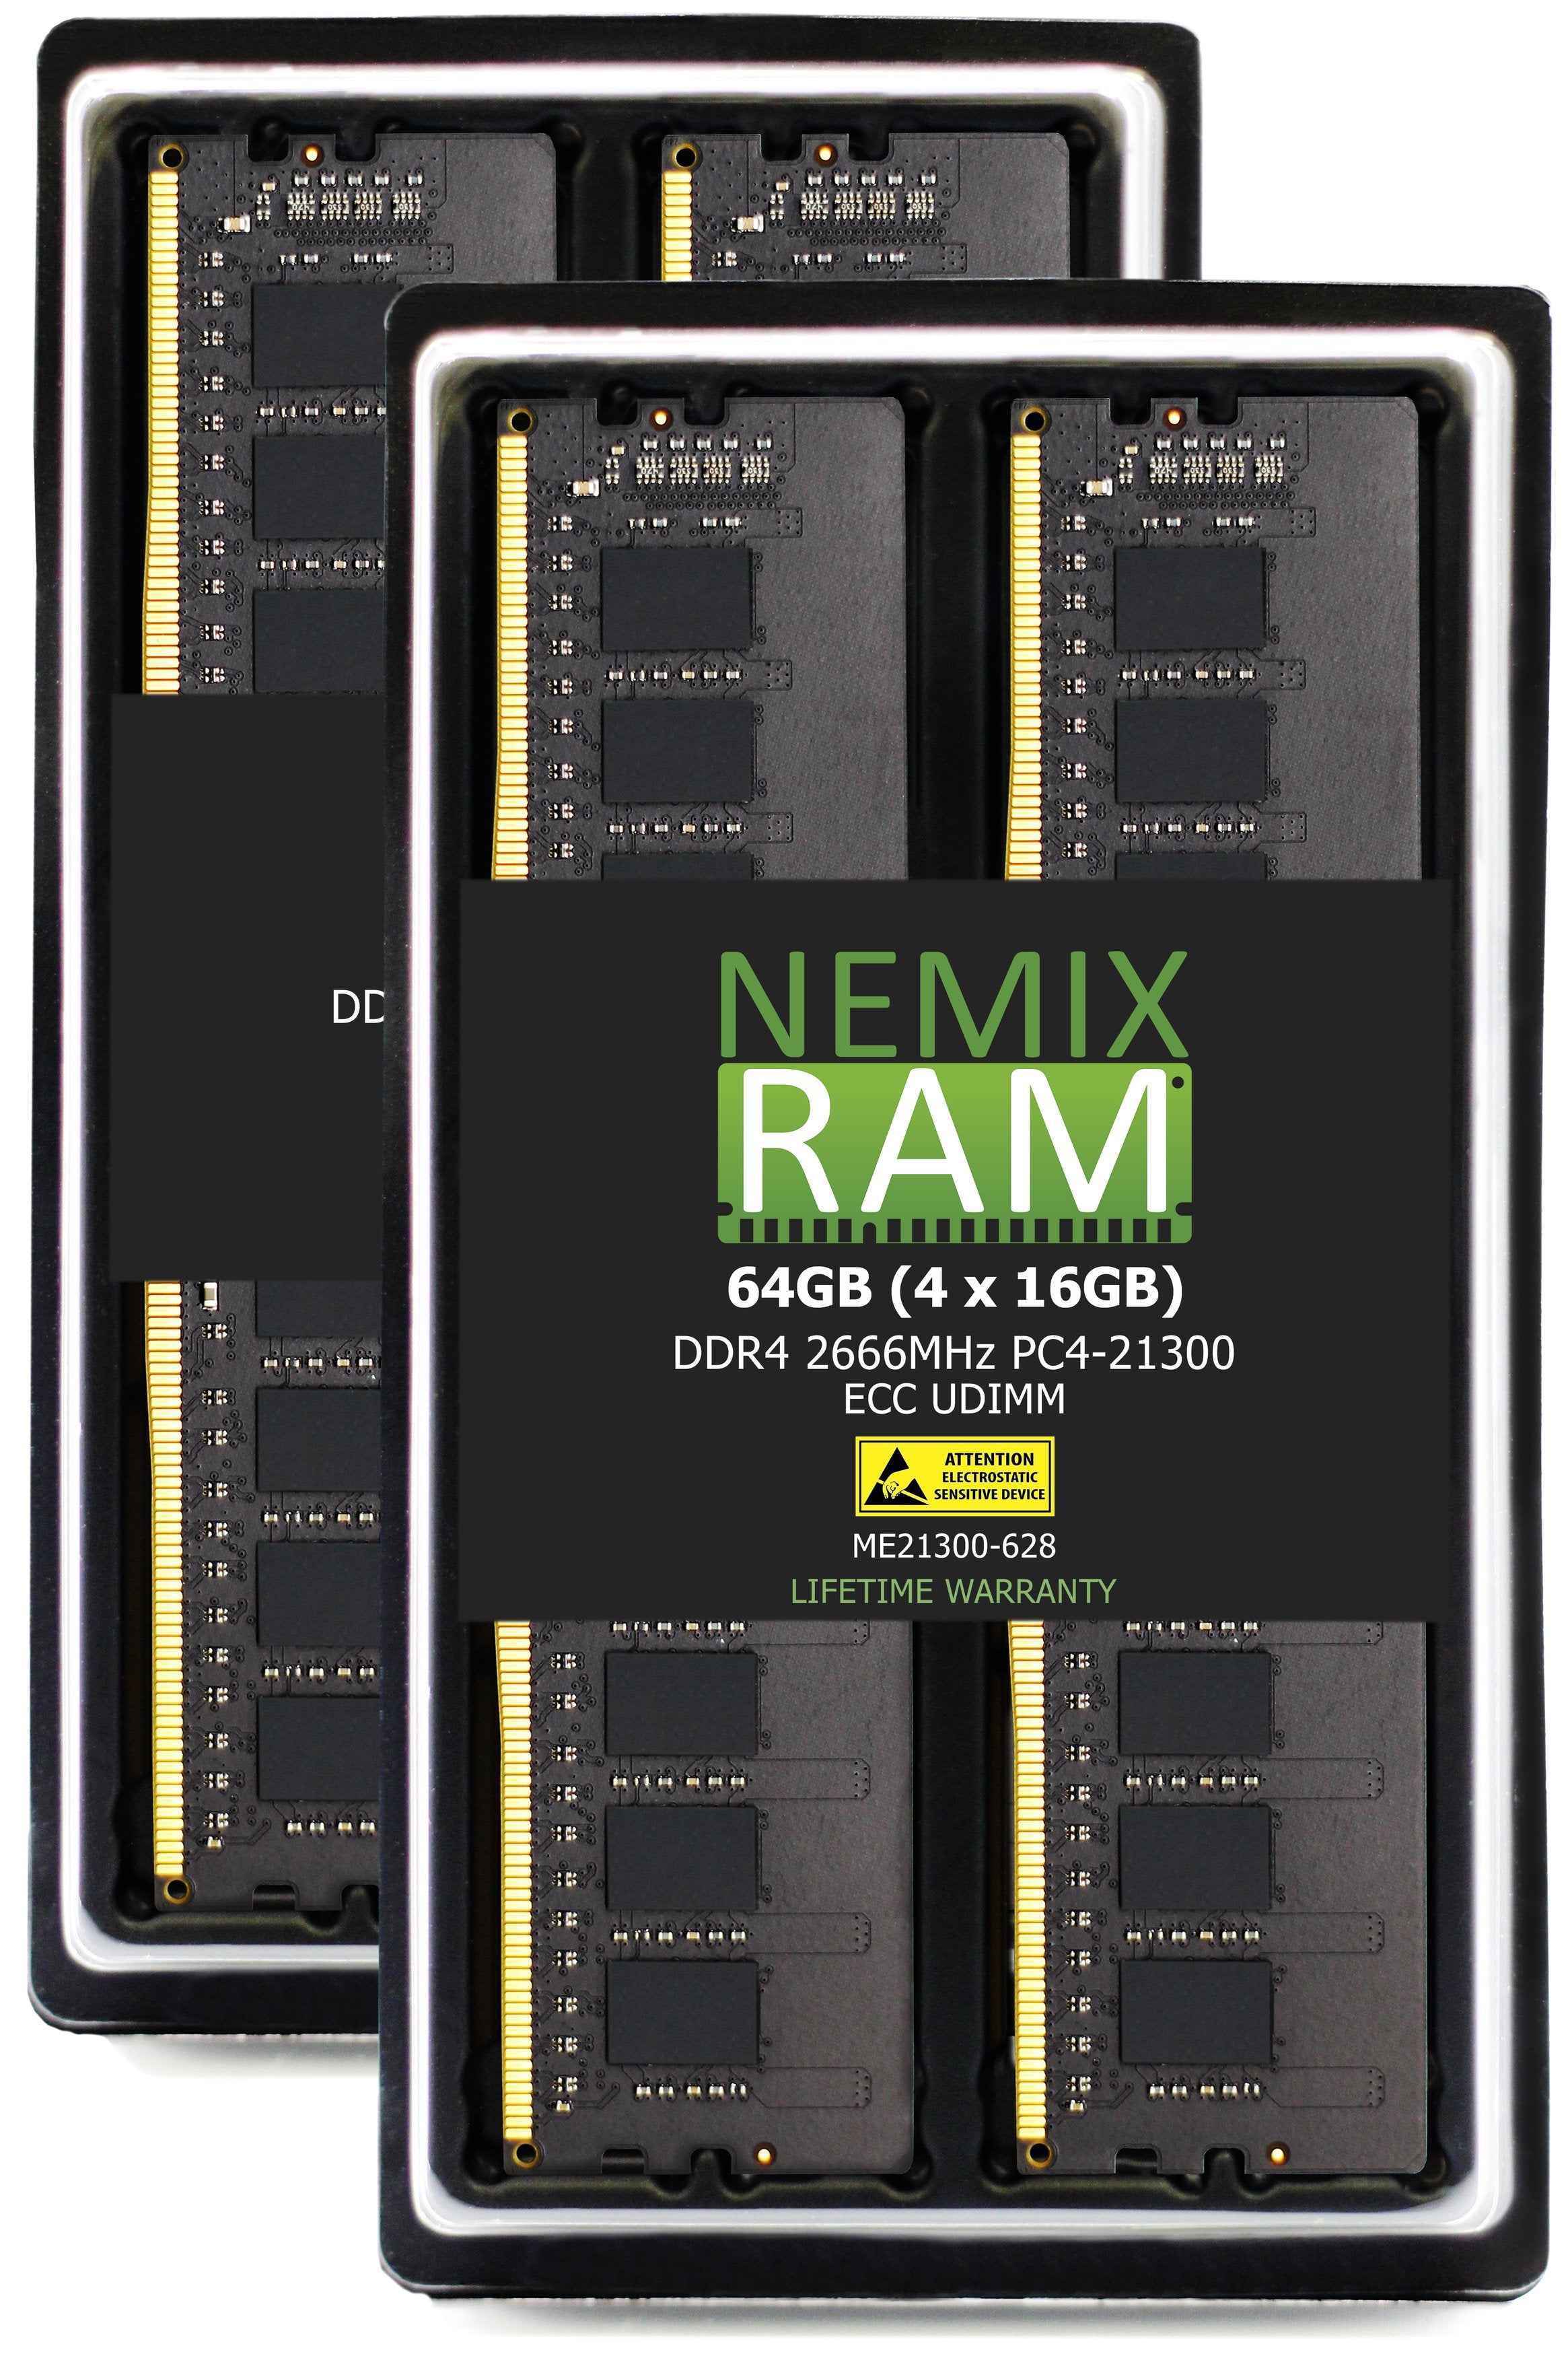 DDR4 2666MHZ PC4-21300 ECC UDIMM Compatible with Synology UC3200